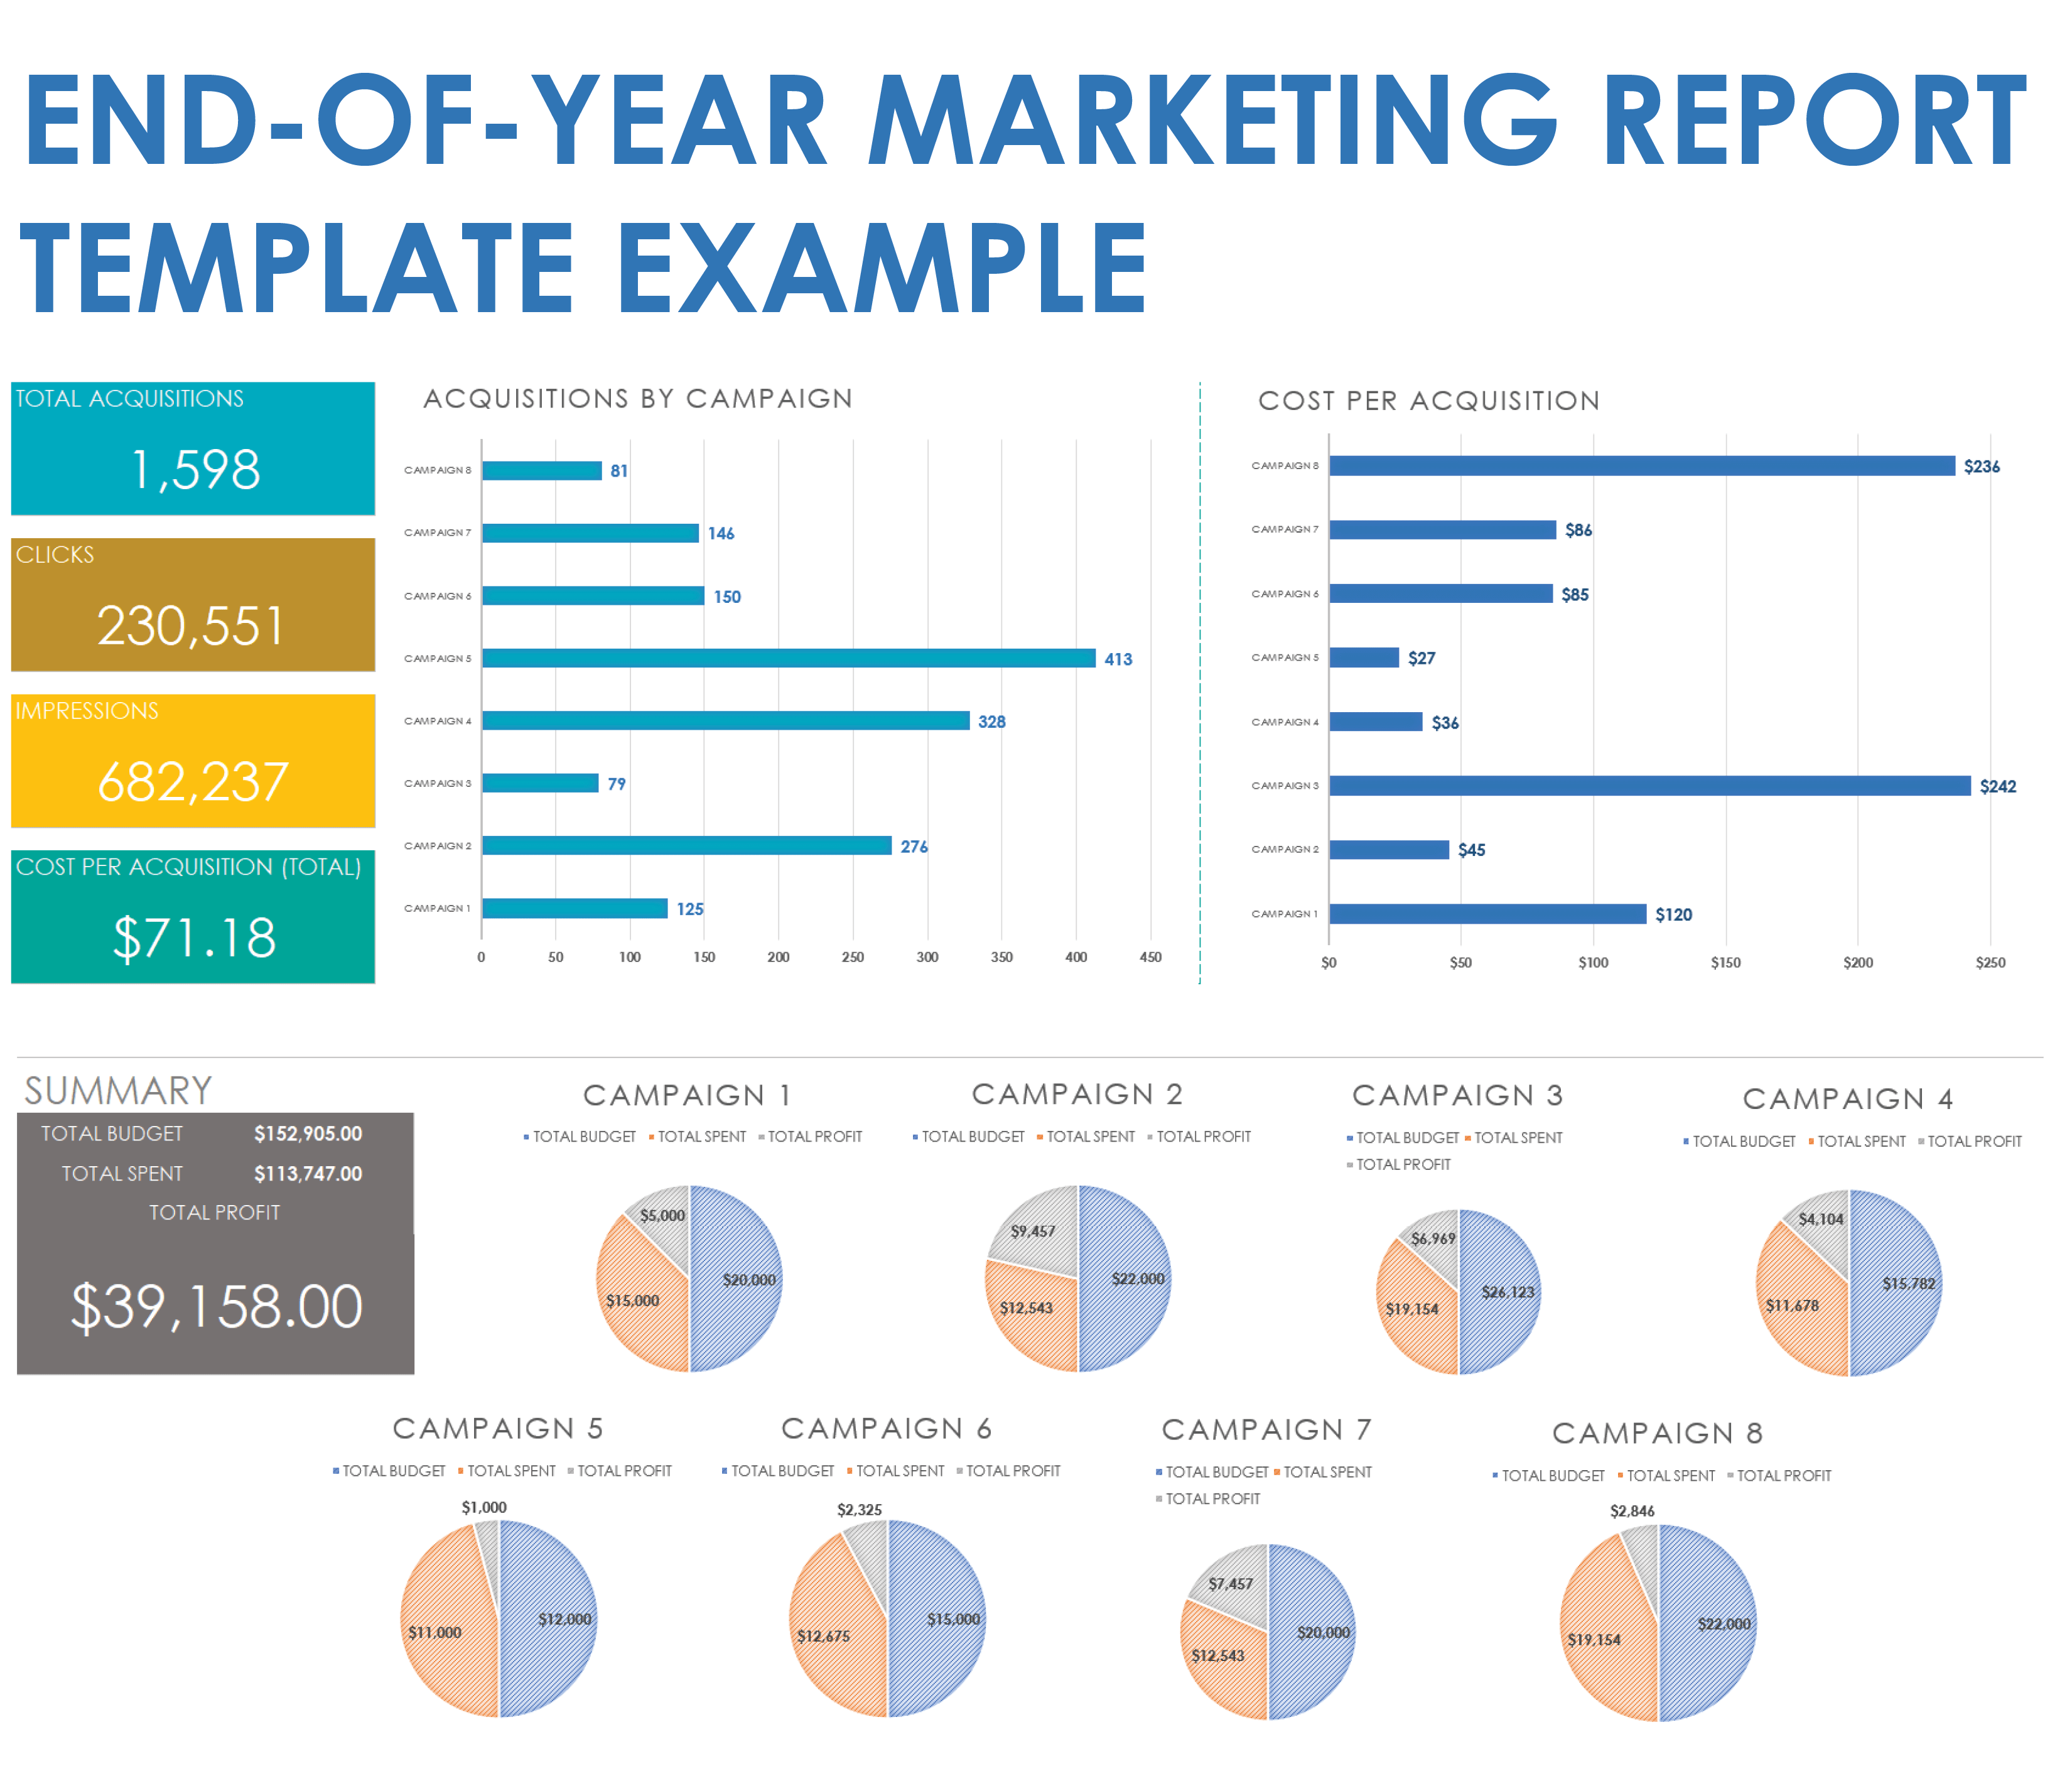 End-of-Year Marketing Report Example Template